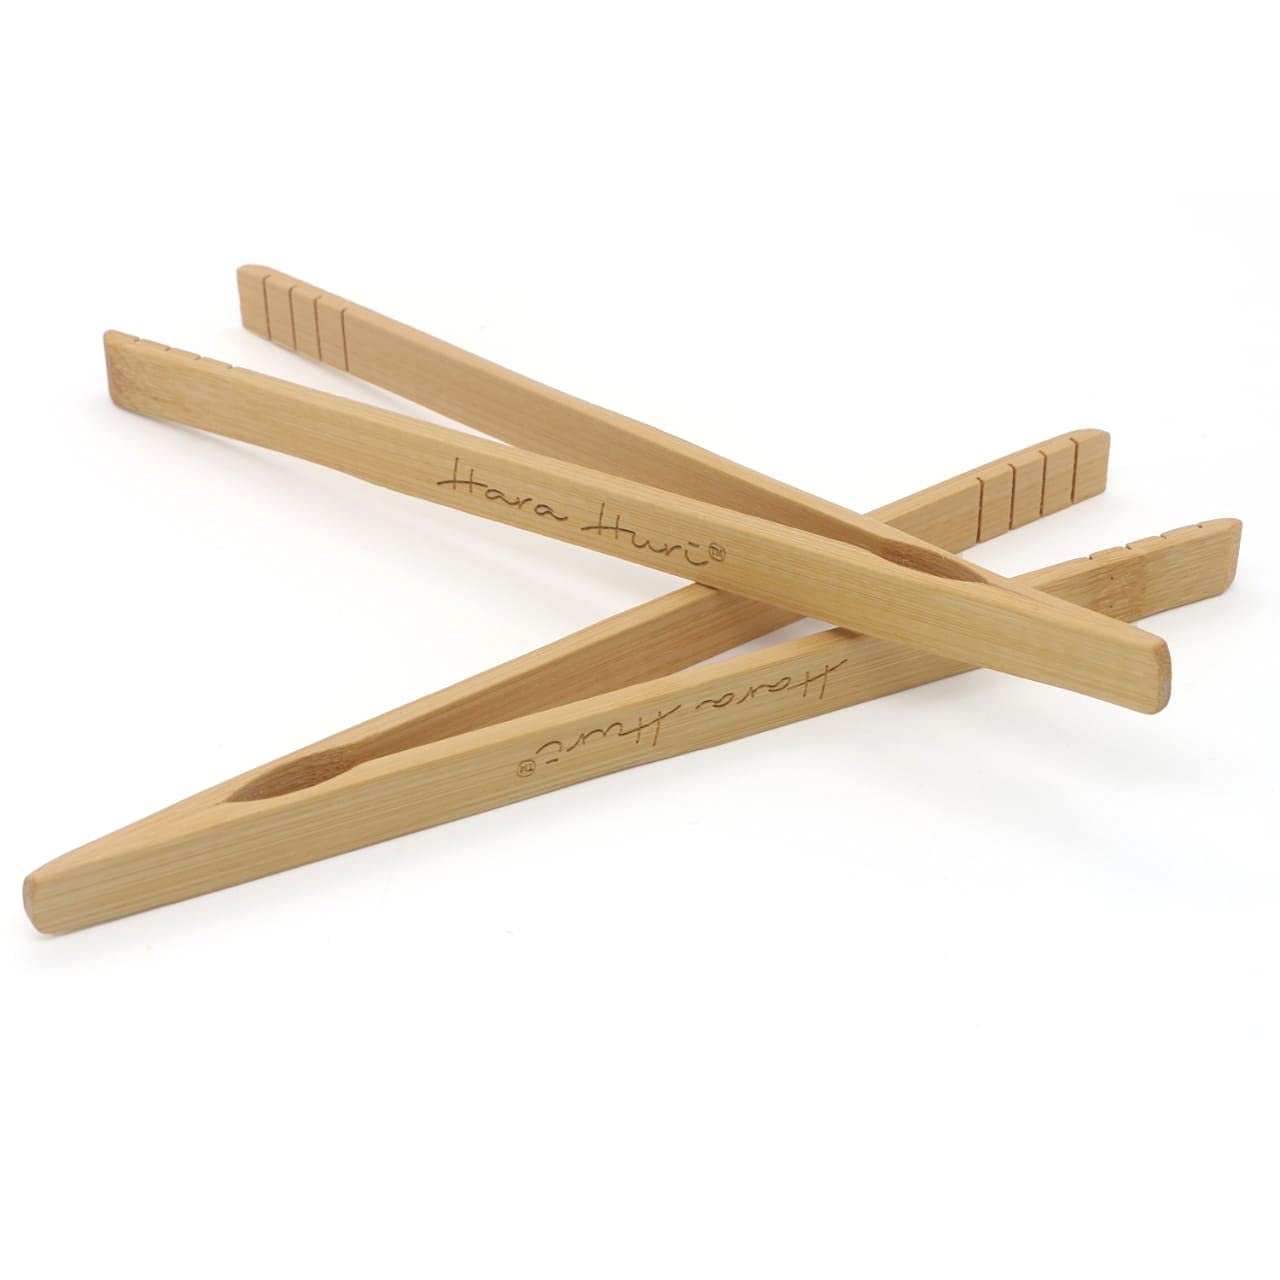 Hara Huri Bamboo Toaster Tongs - Set of 2 Reusable Heat Resistant Wooden Toast Tongs - 8 Inch Long Natural Wood Kitchen Utensil for Serving Pickle Muffin